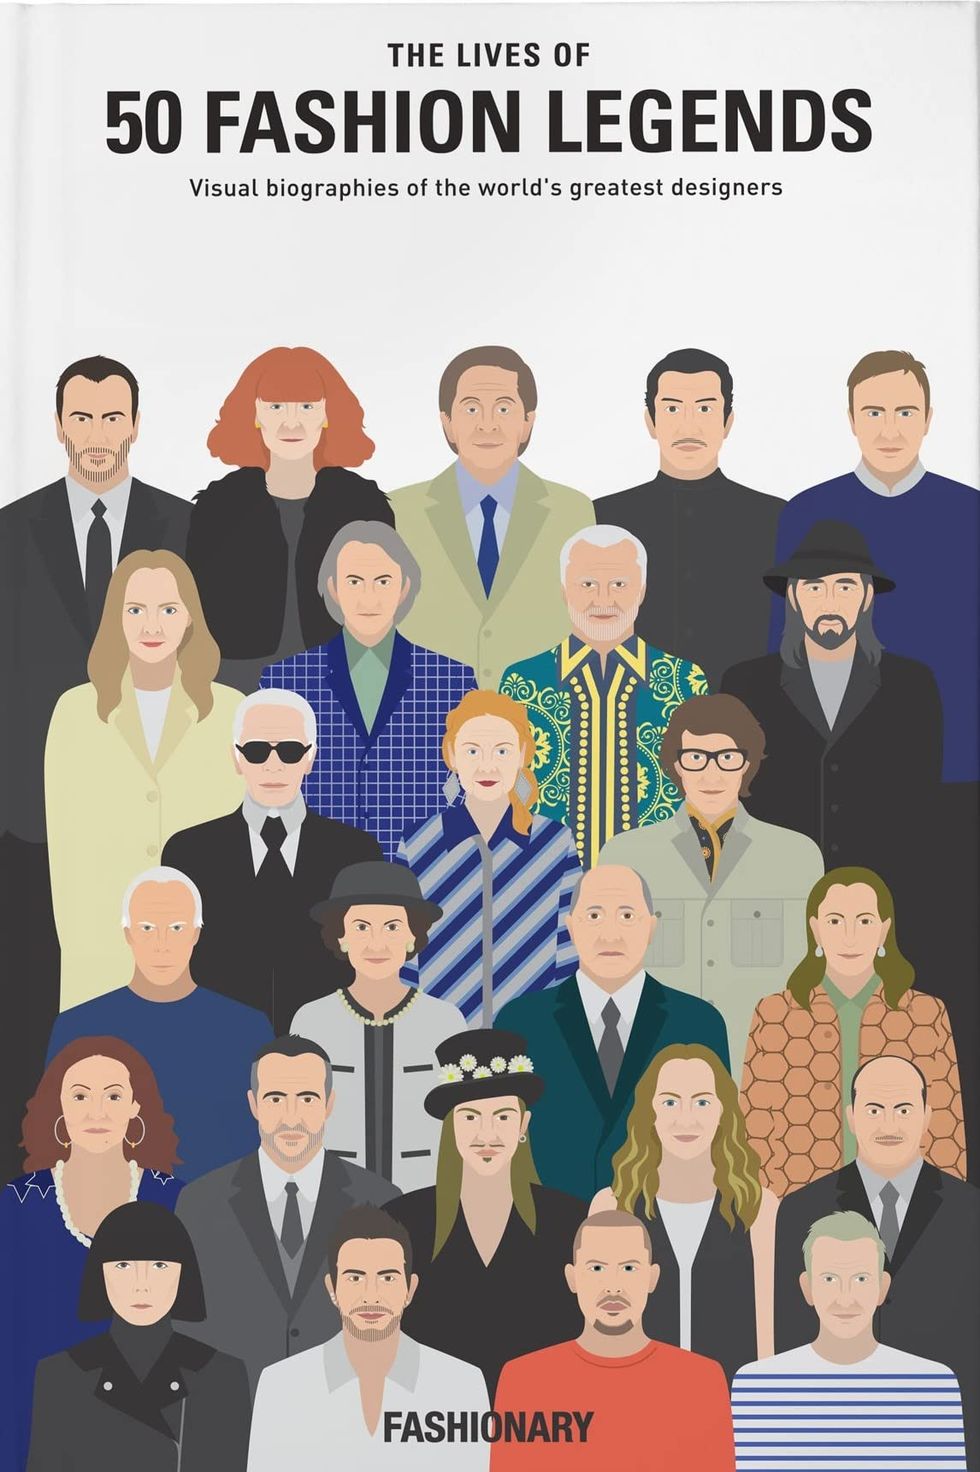 The Lives of 50 Fashion Legends: Visual biographies of the world's greatest designers